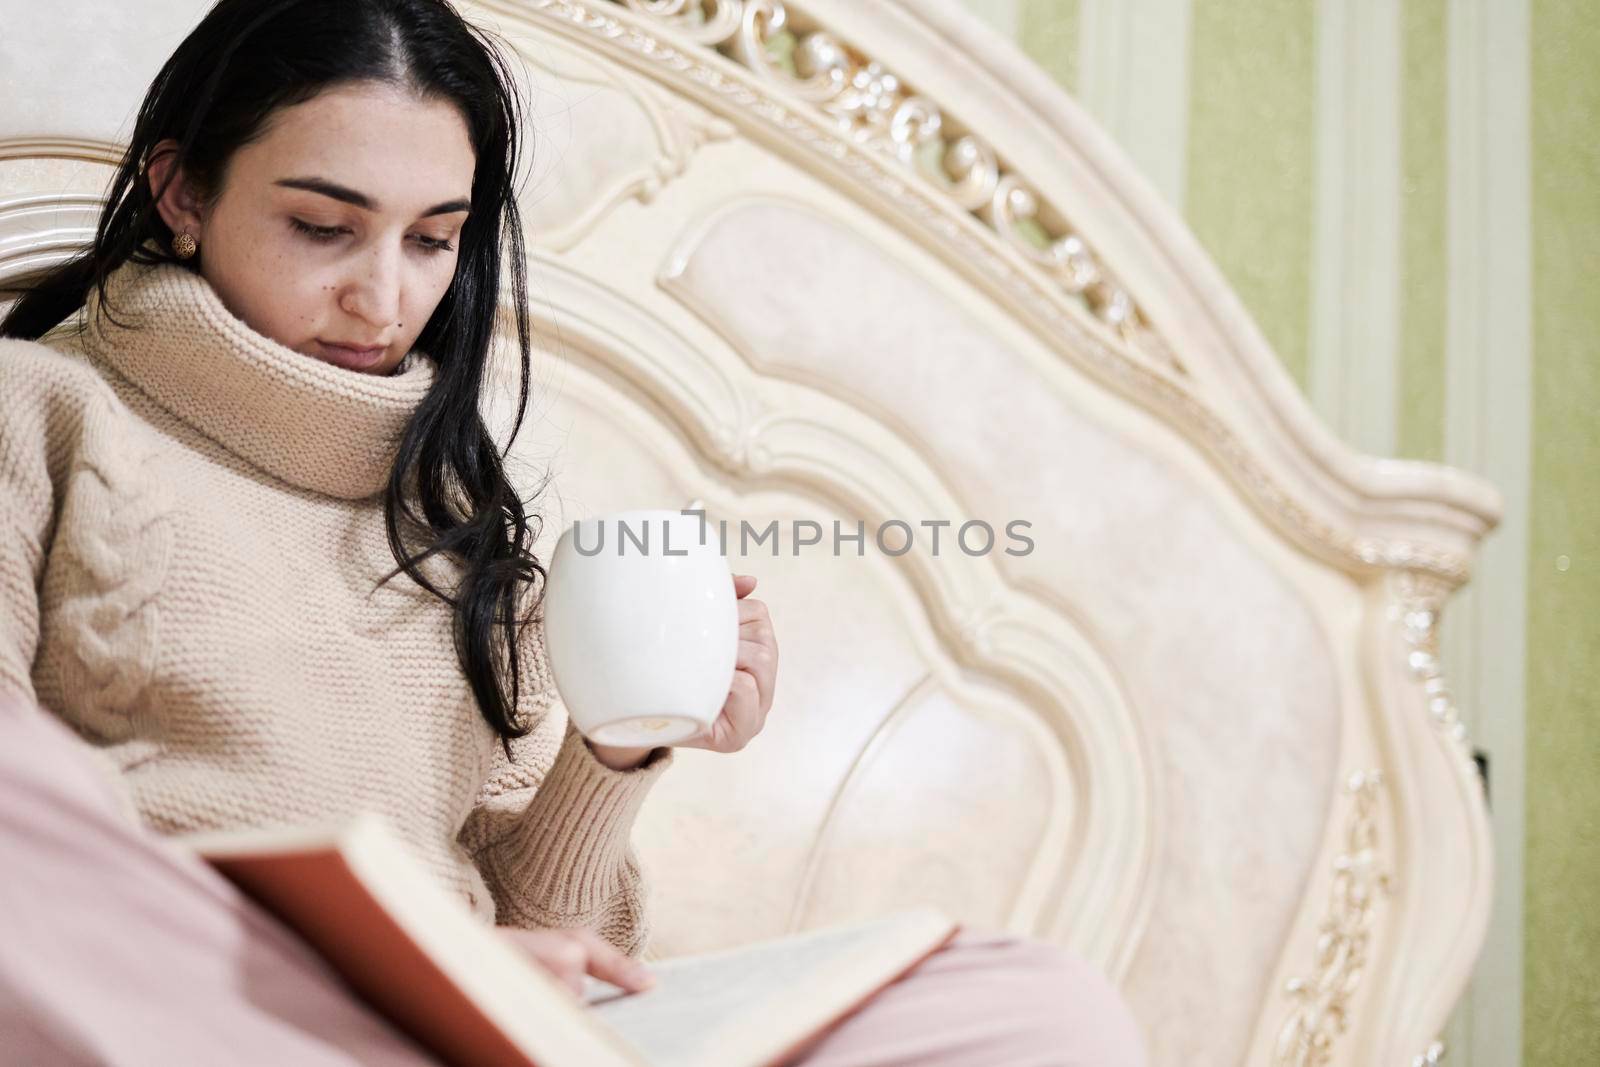 Reading in bed. Young woman drinking coffee and reading a book in the bed. Multi-racial female reads a book in the bed. Cozy autumn morning in the bedroom. Young female enjoys weekend